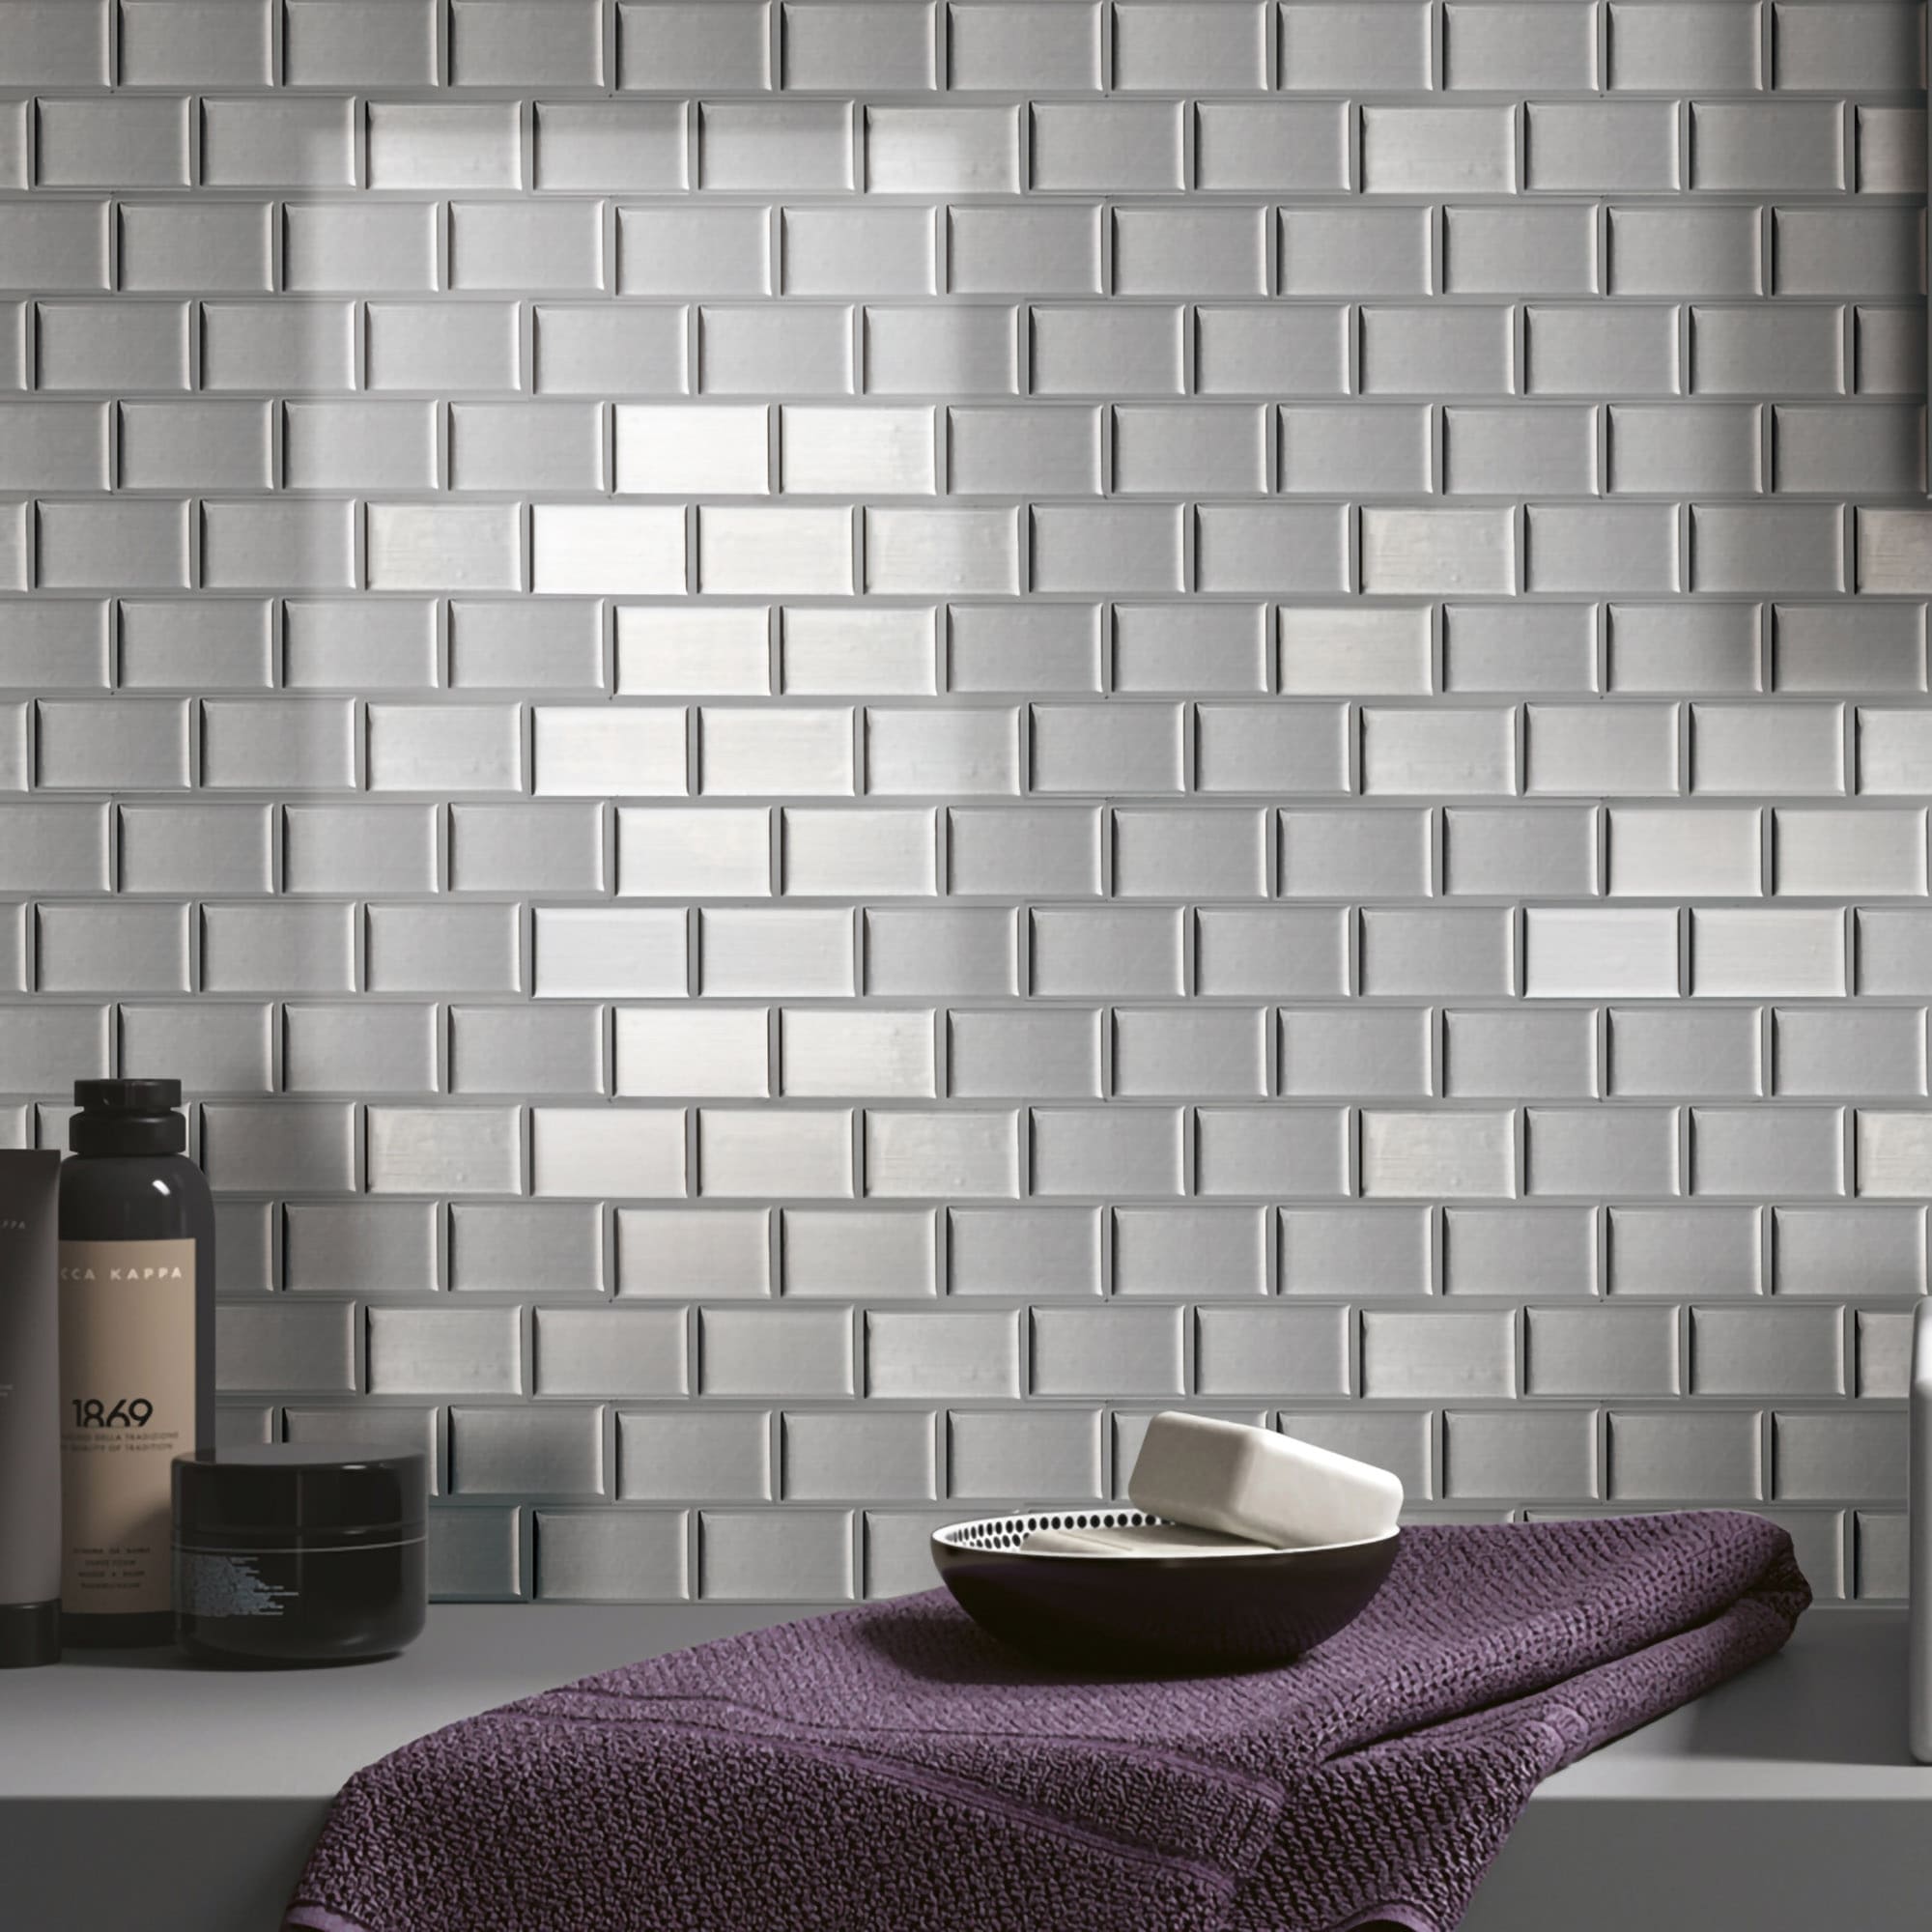 2.5 x 12 Stainless Steel Subway Tile - Stainless Steel Tile